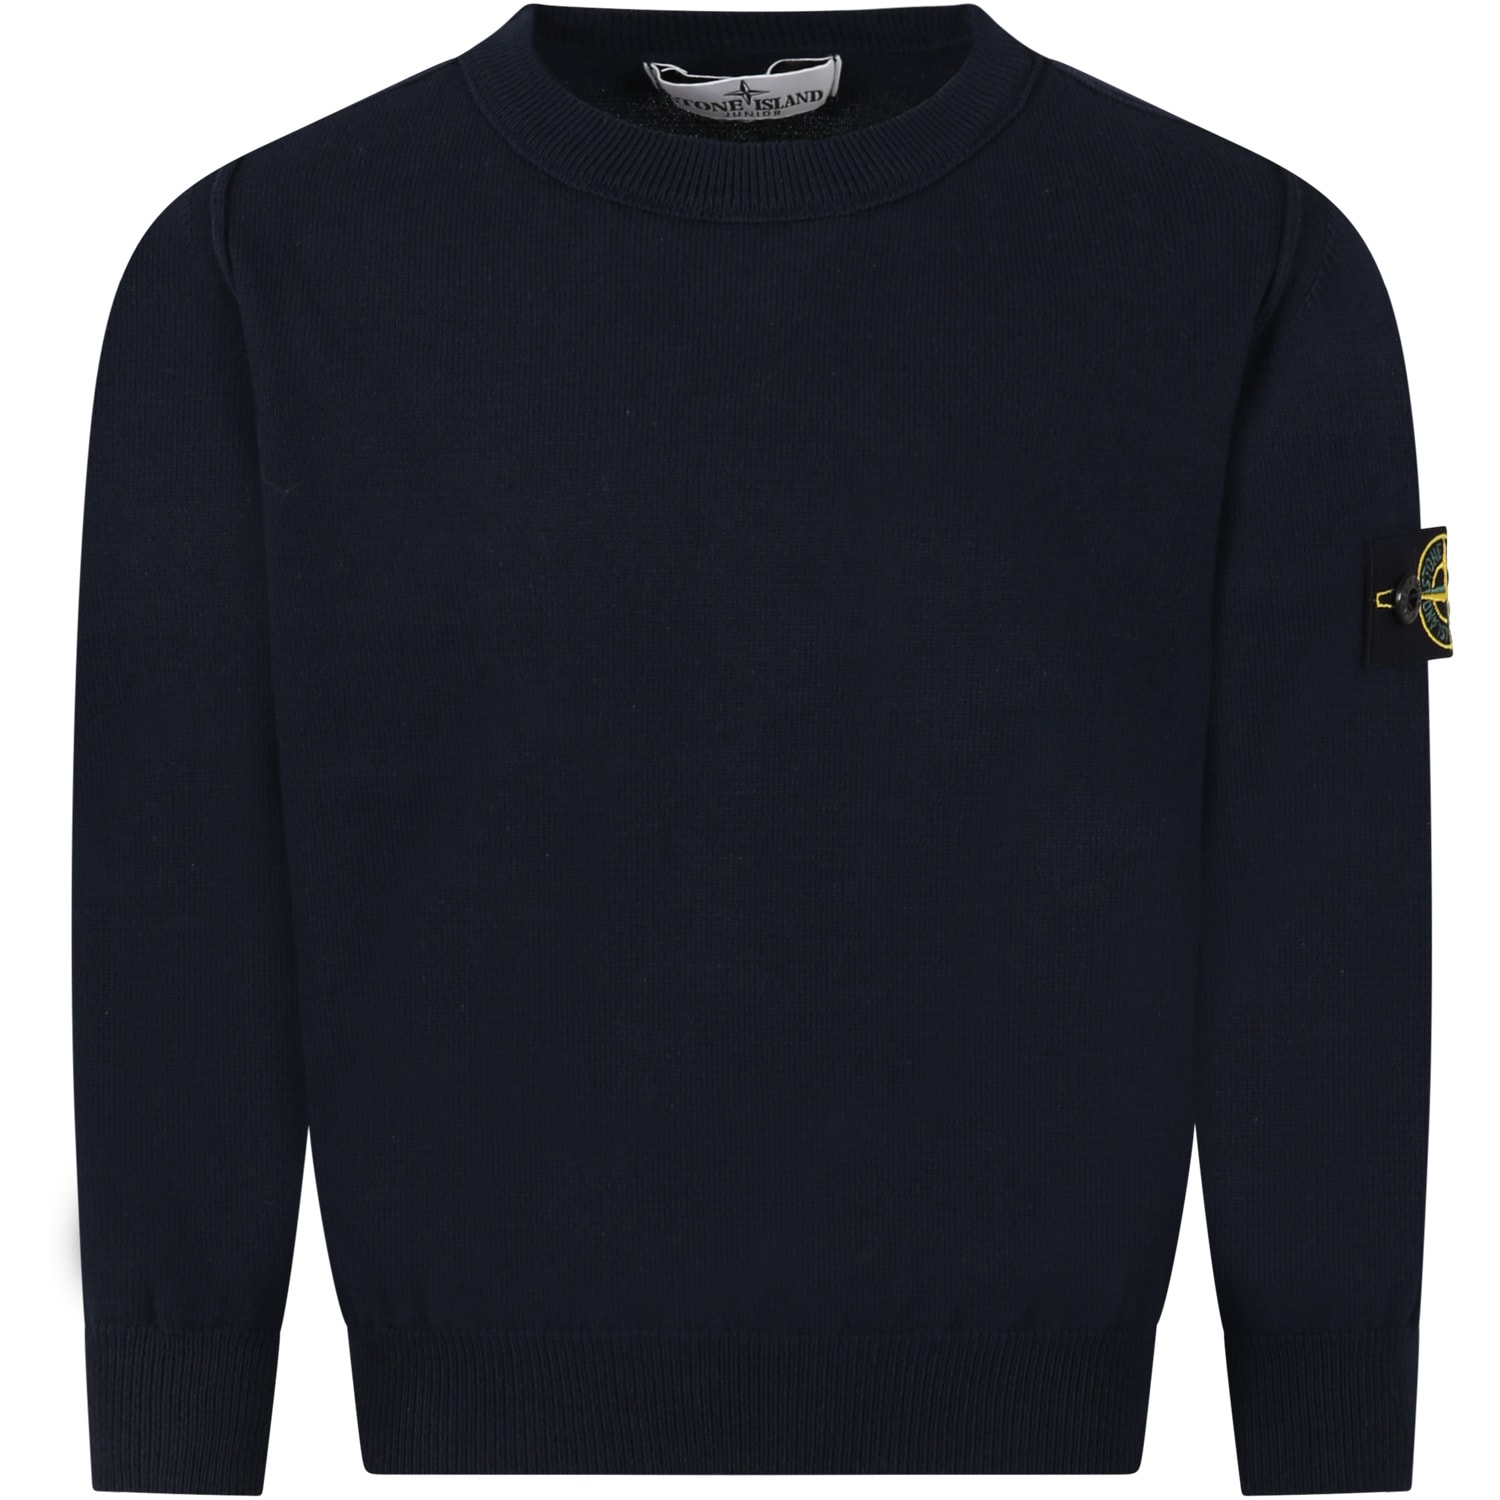 STONE ISLAND JUNIOR NAVY BLUE SWEATER FOR BOY WITH ICONIC COMPASS